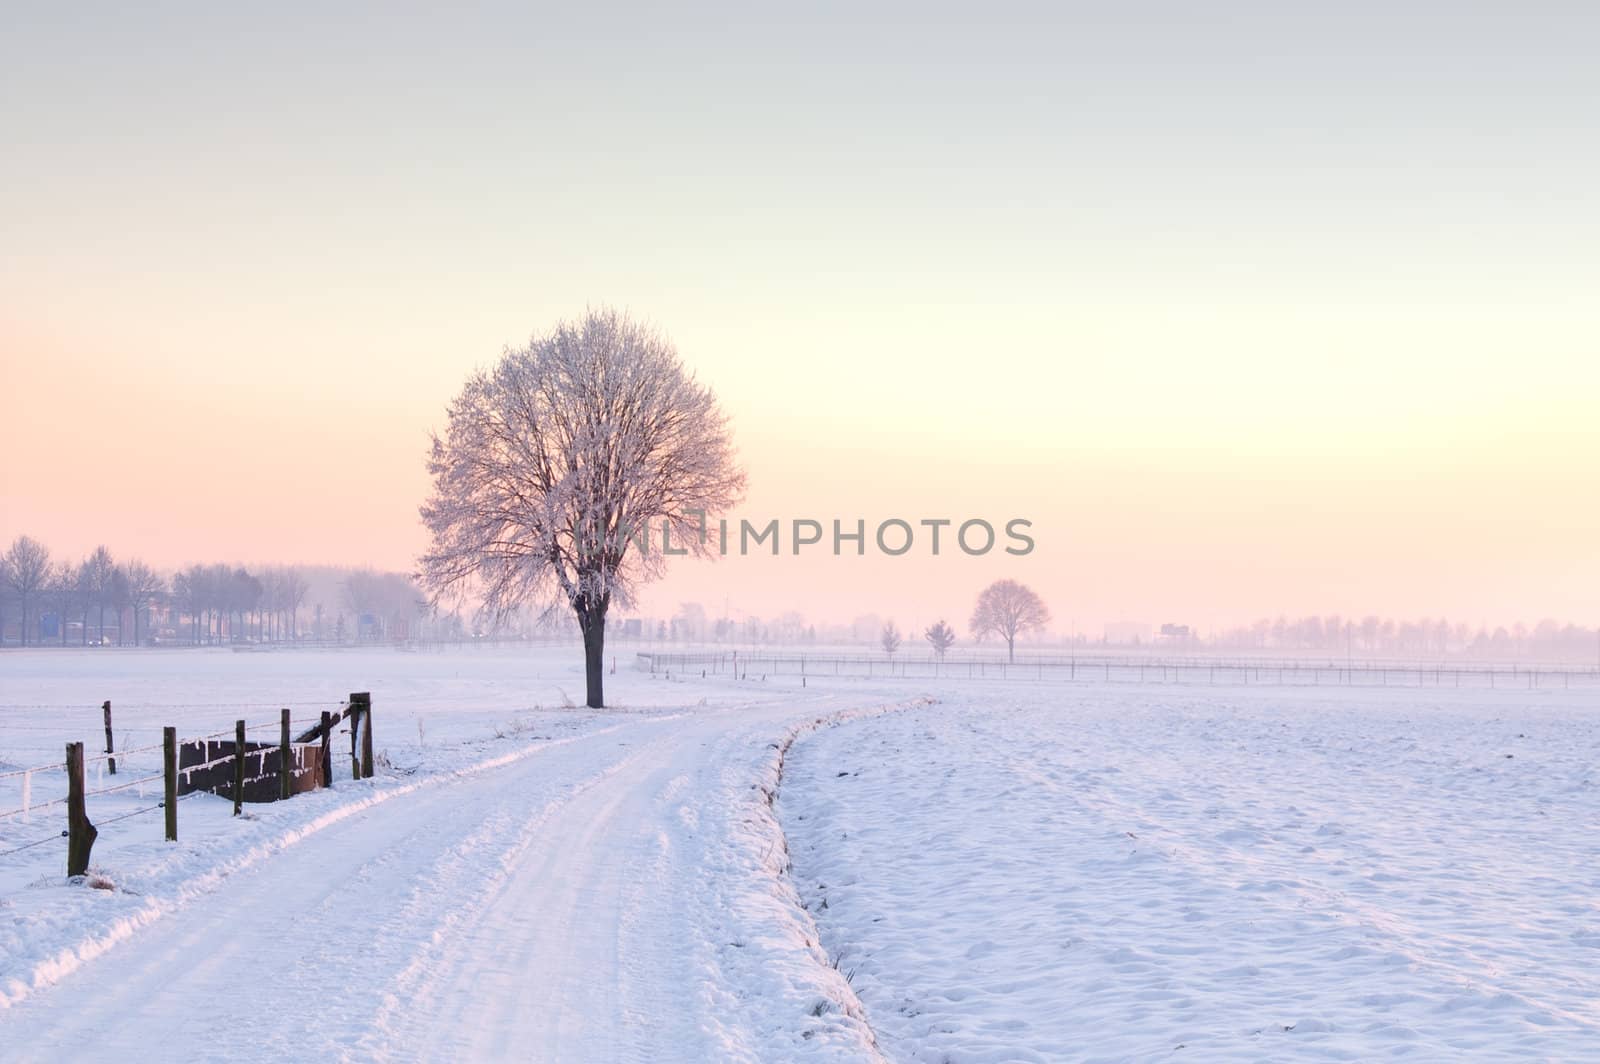 lone standing winter tree in a pale sunset landscape